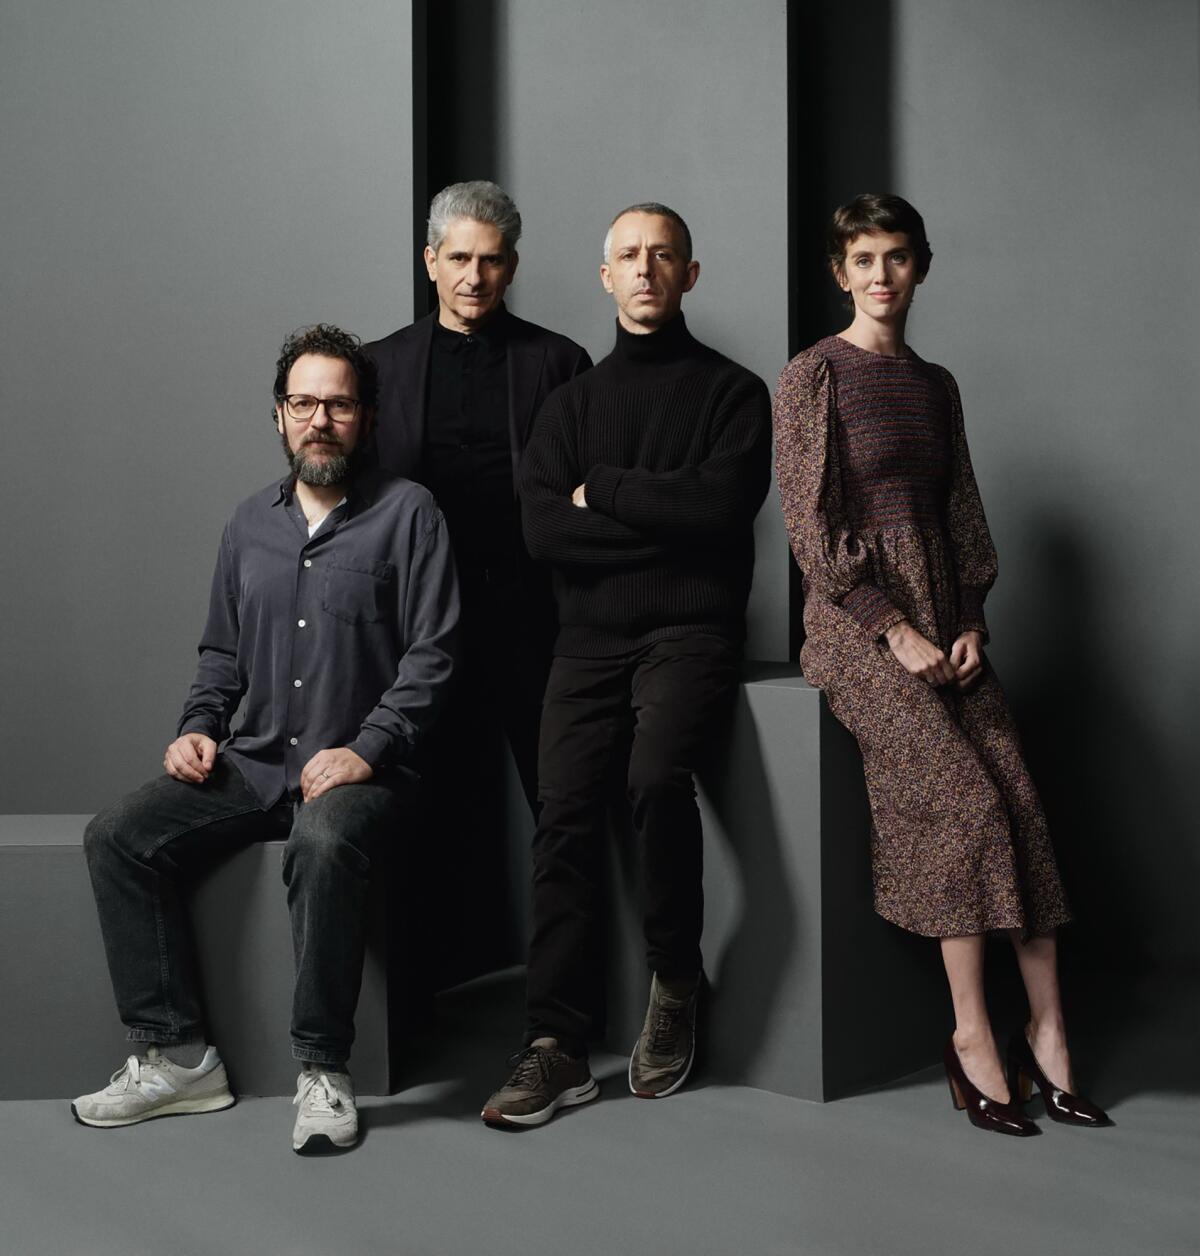 Four theater actors and creators — three men and one woman — sit staggered around a geometric, grey backdrop.